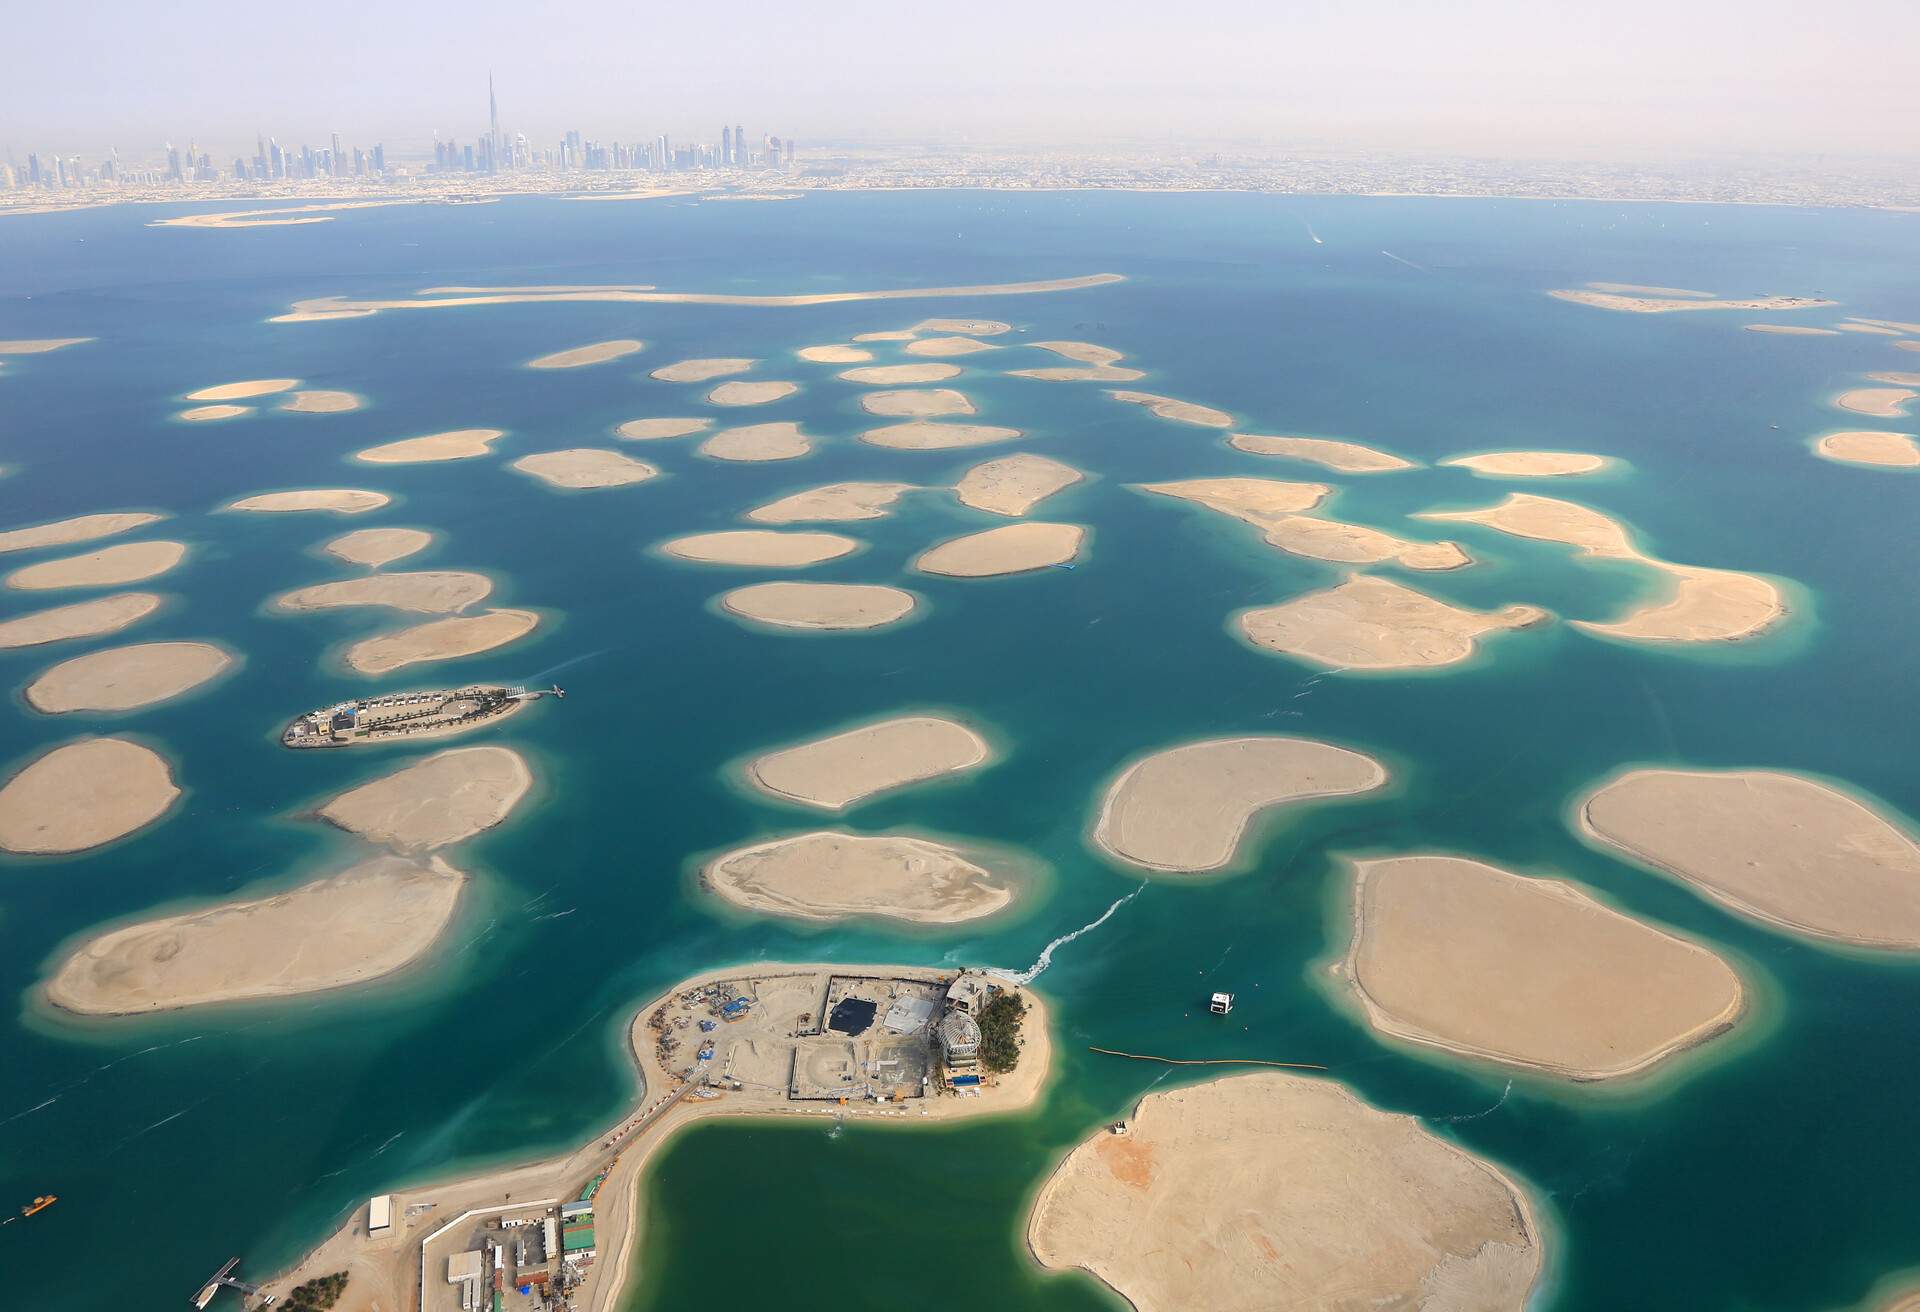 Everything there is to know about the Dubai World Islands | KAYAK